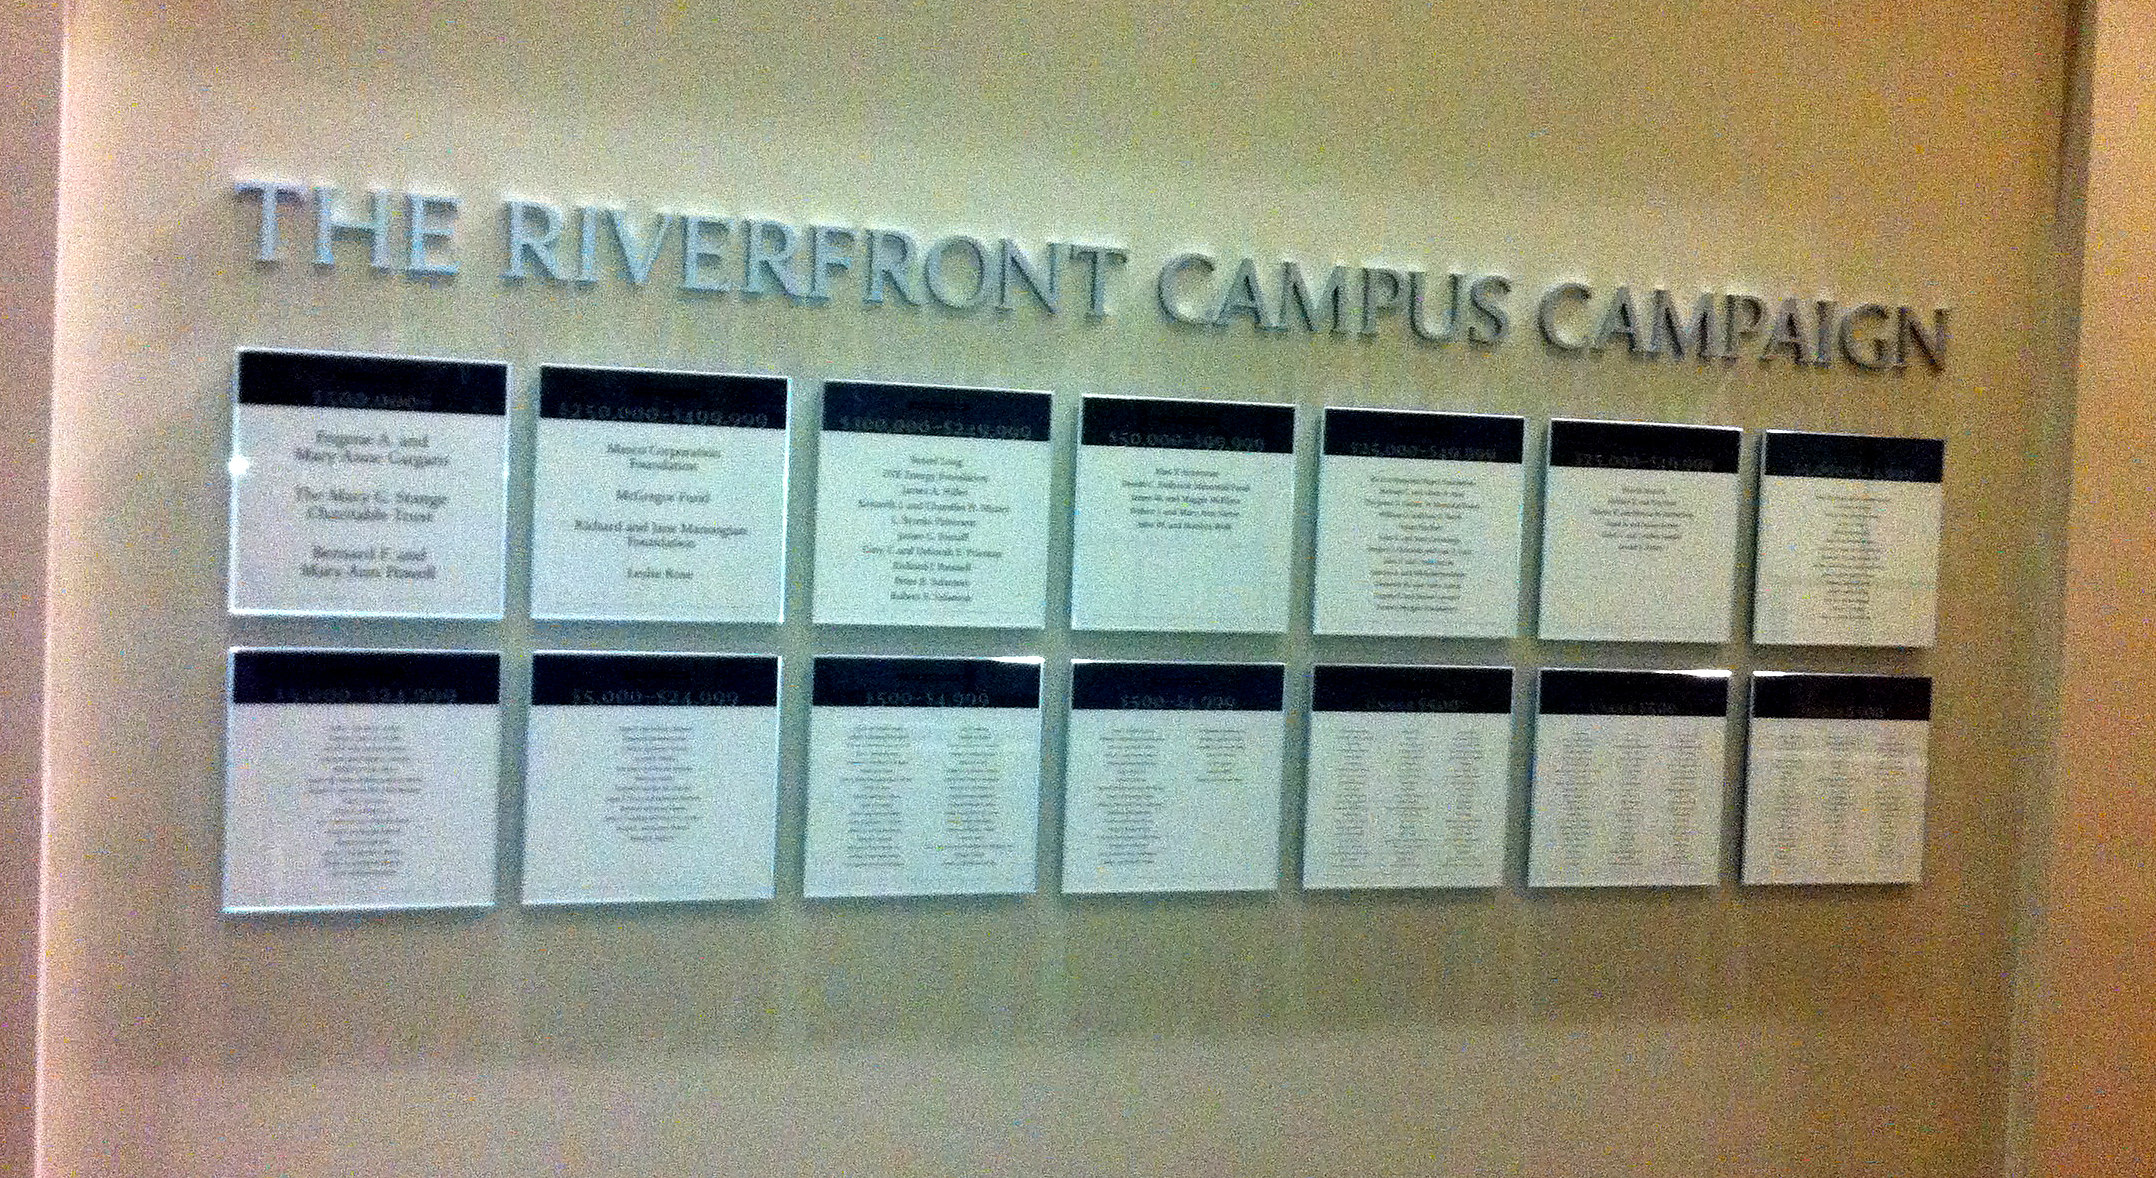 U of D - Law Donor Wall 1